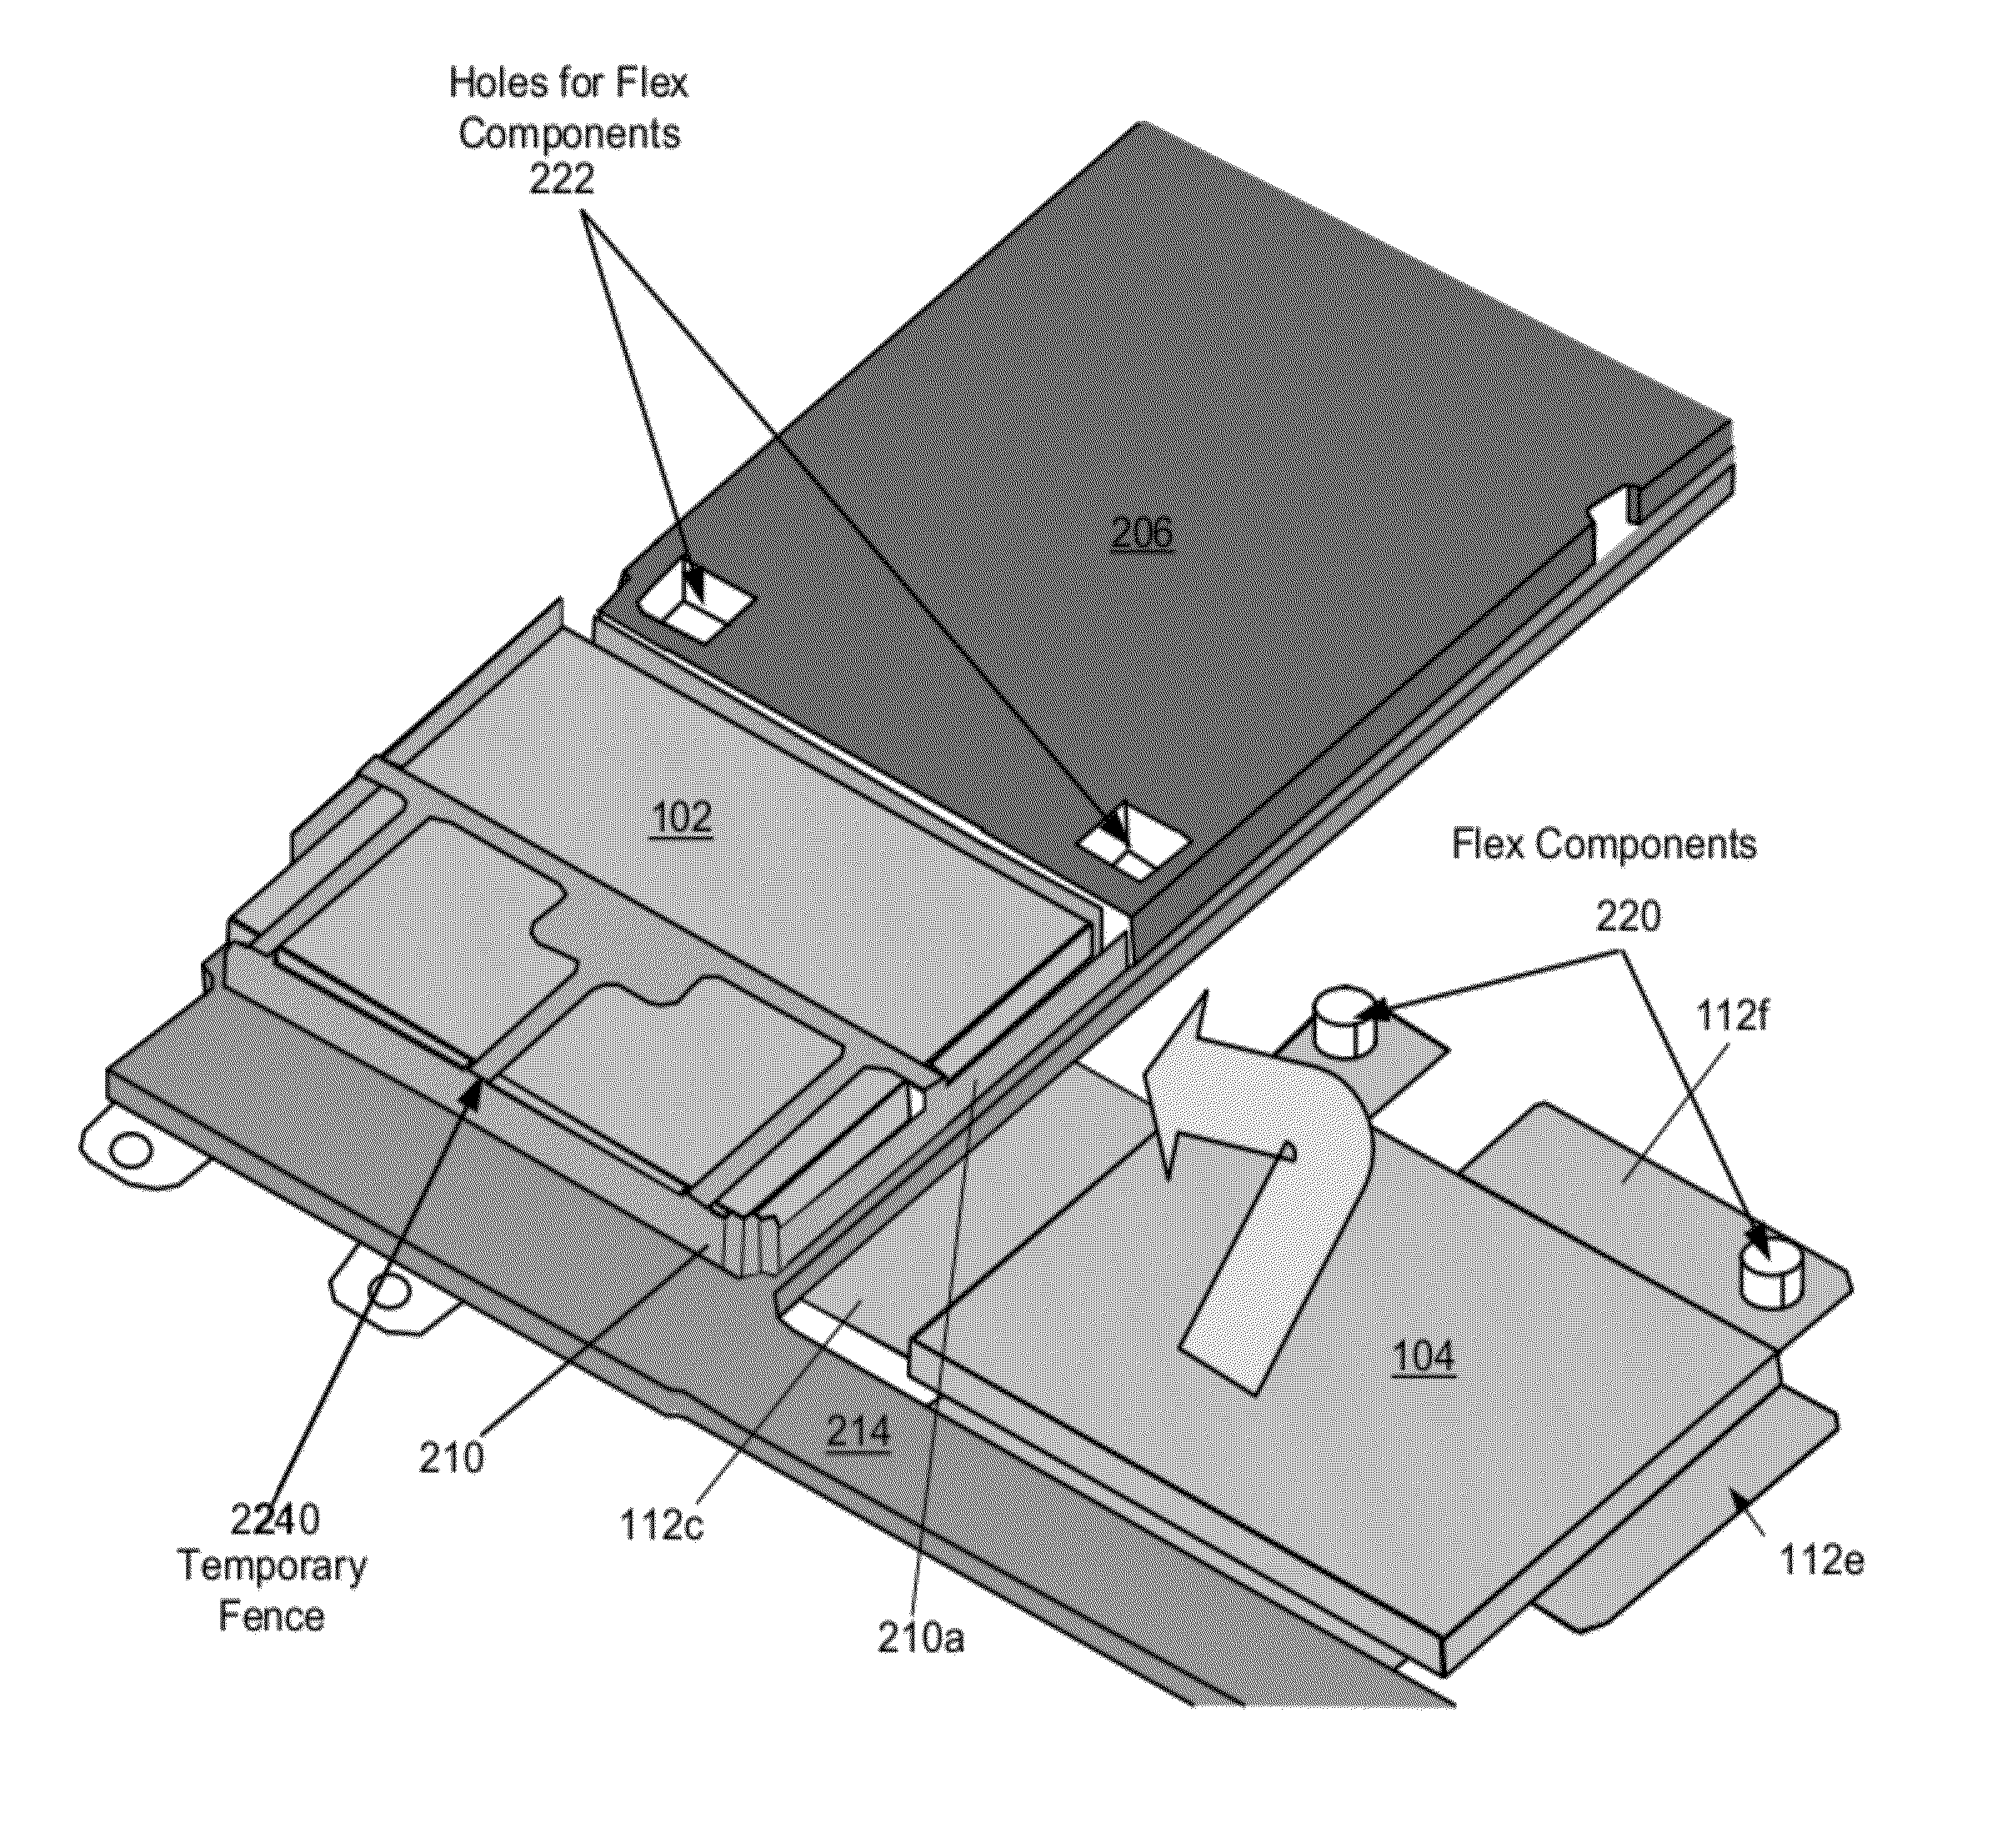 Compact folded configuration for integrated circuit packaging